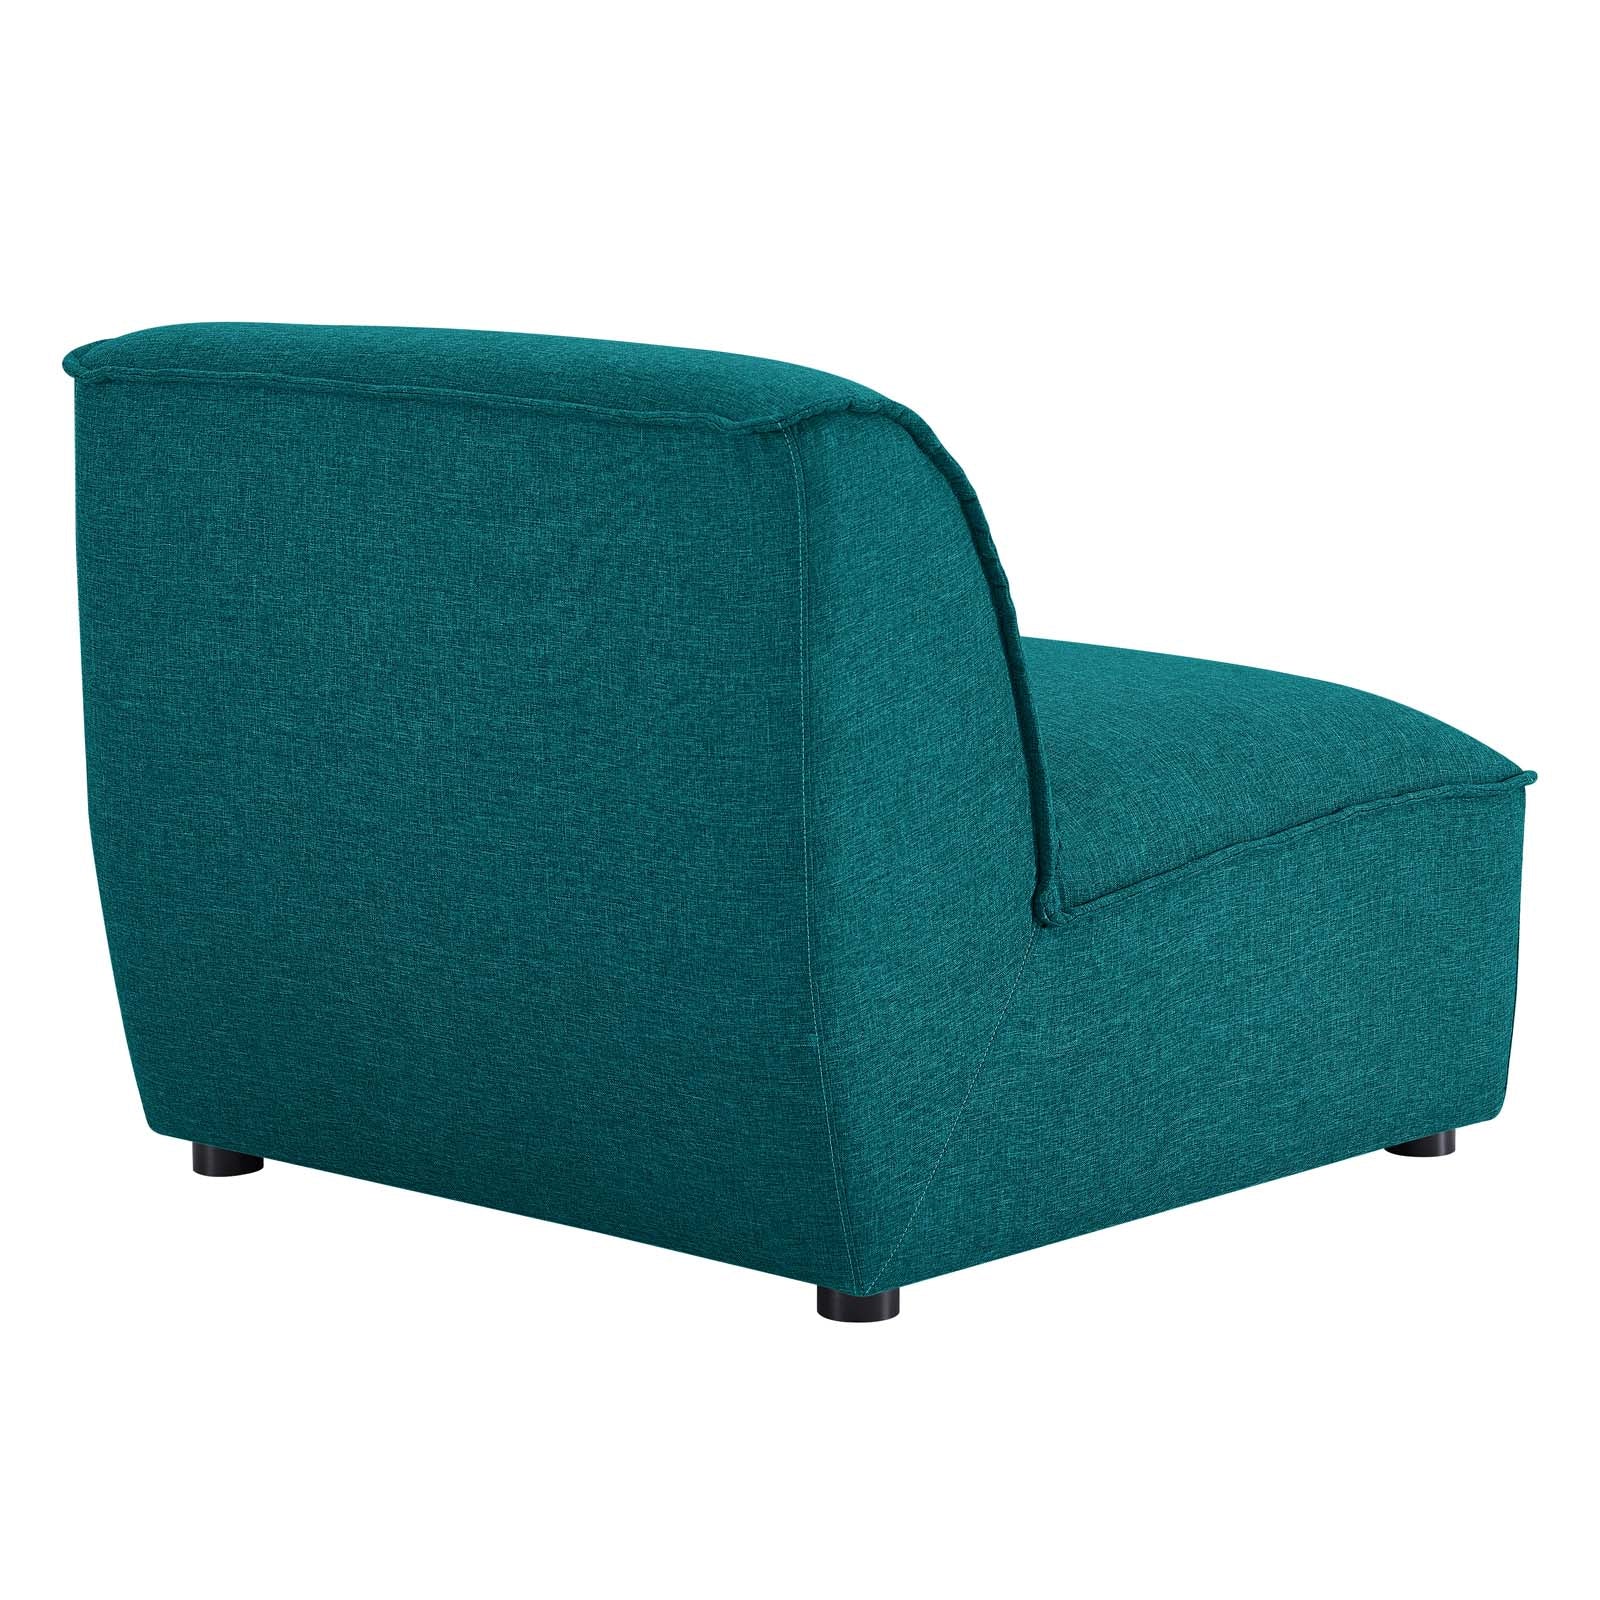 Comprise Armless Chair-Armless Chair-Modway-Wall2Wall Furnishings